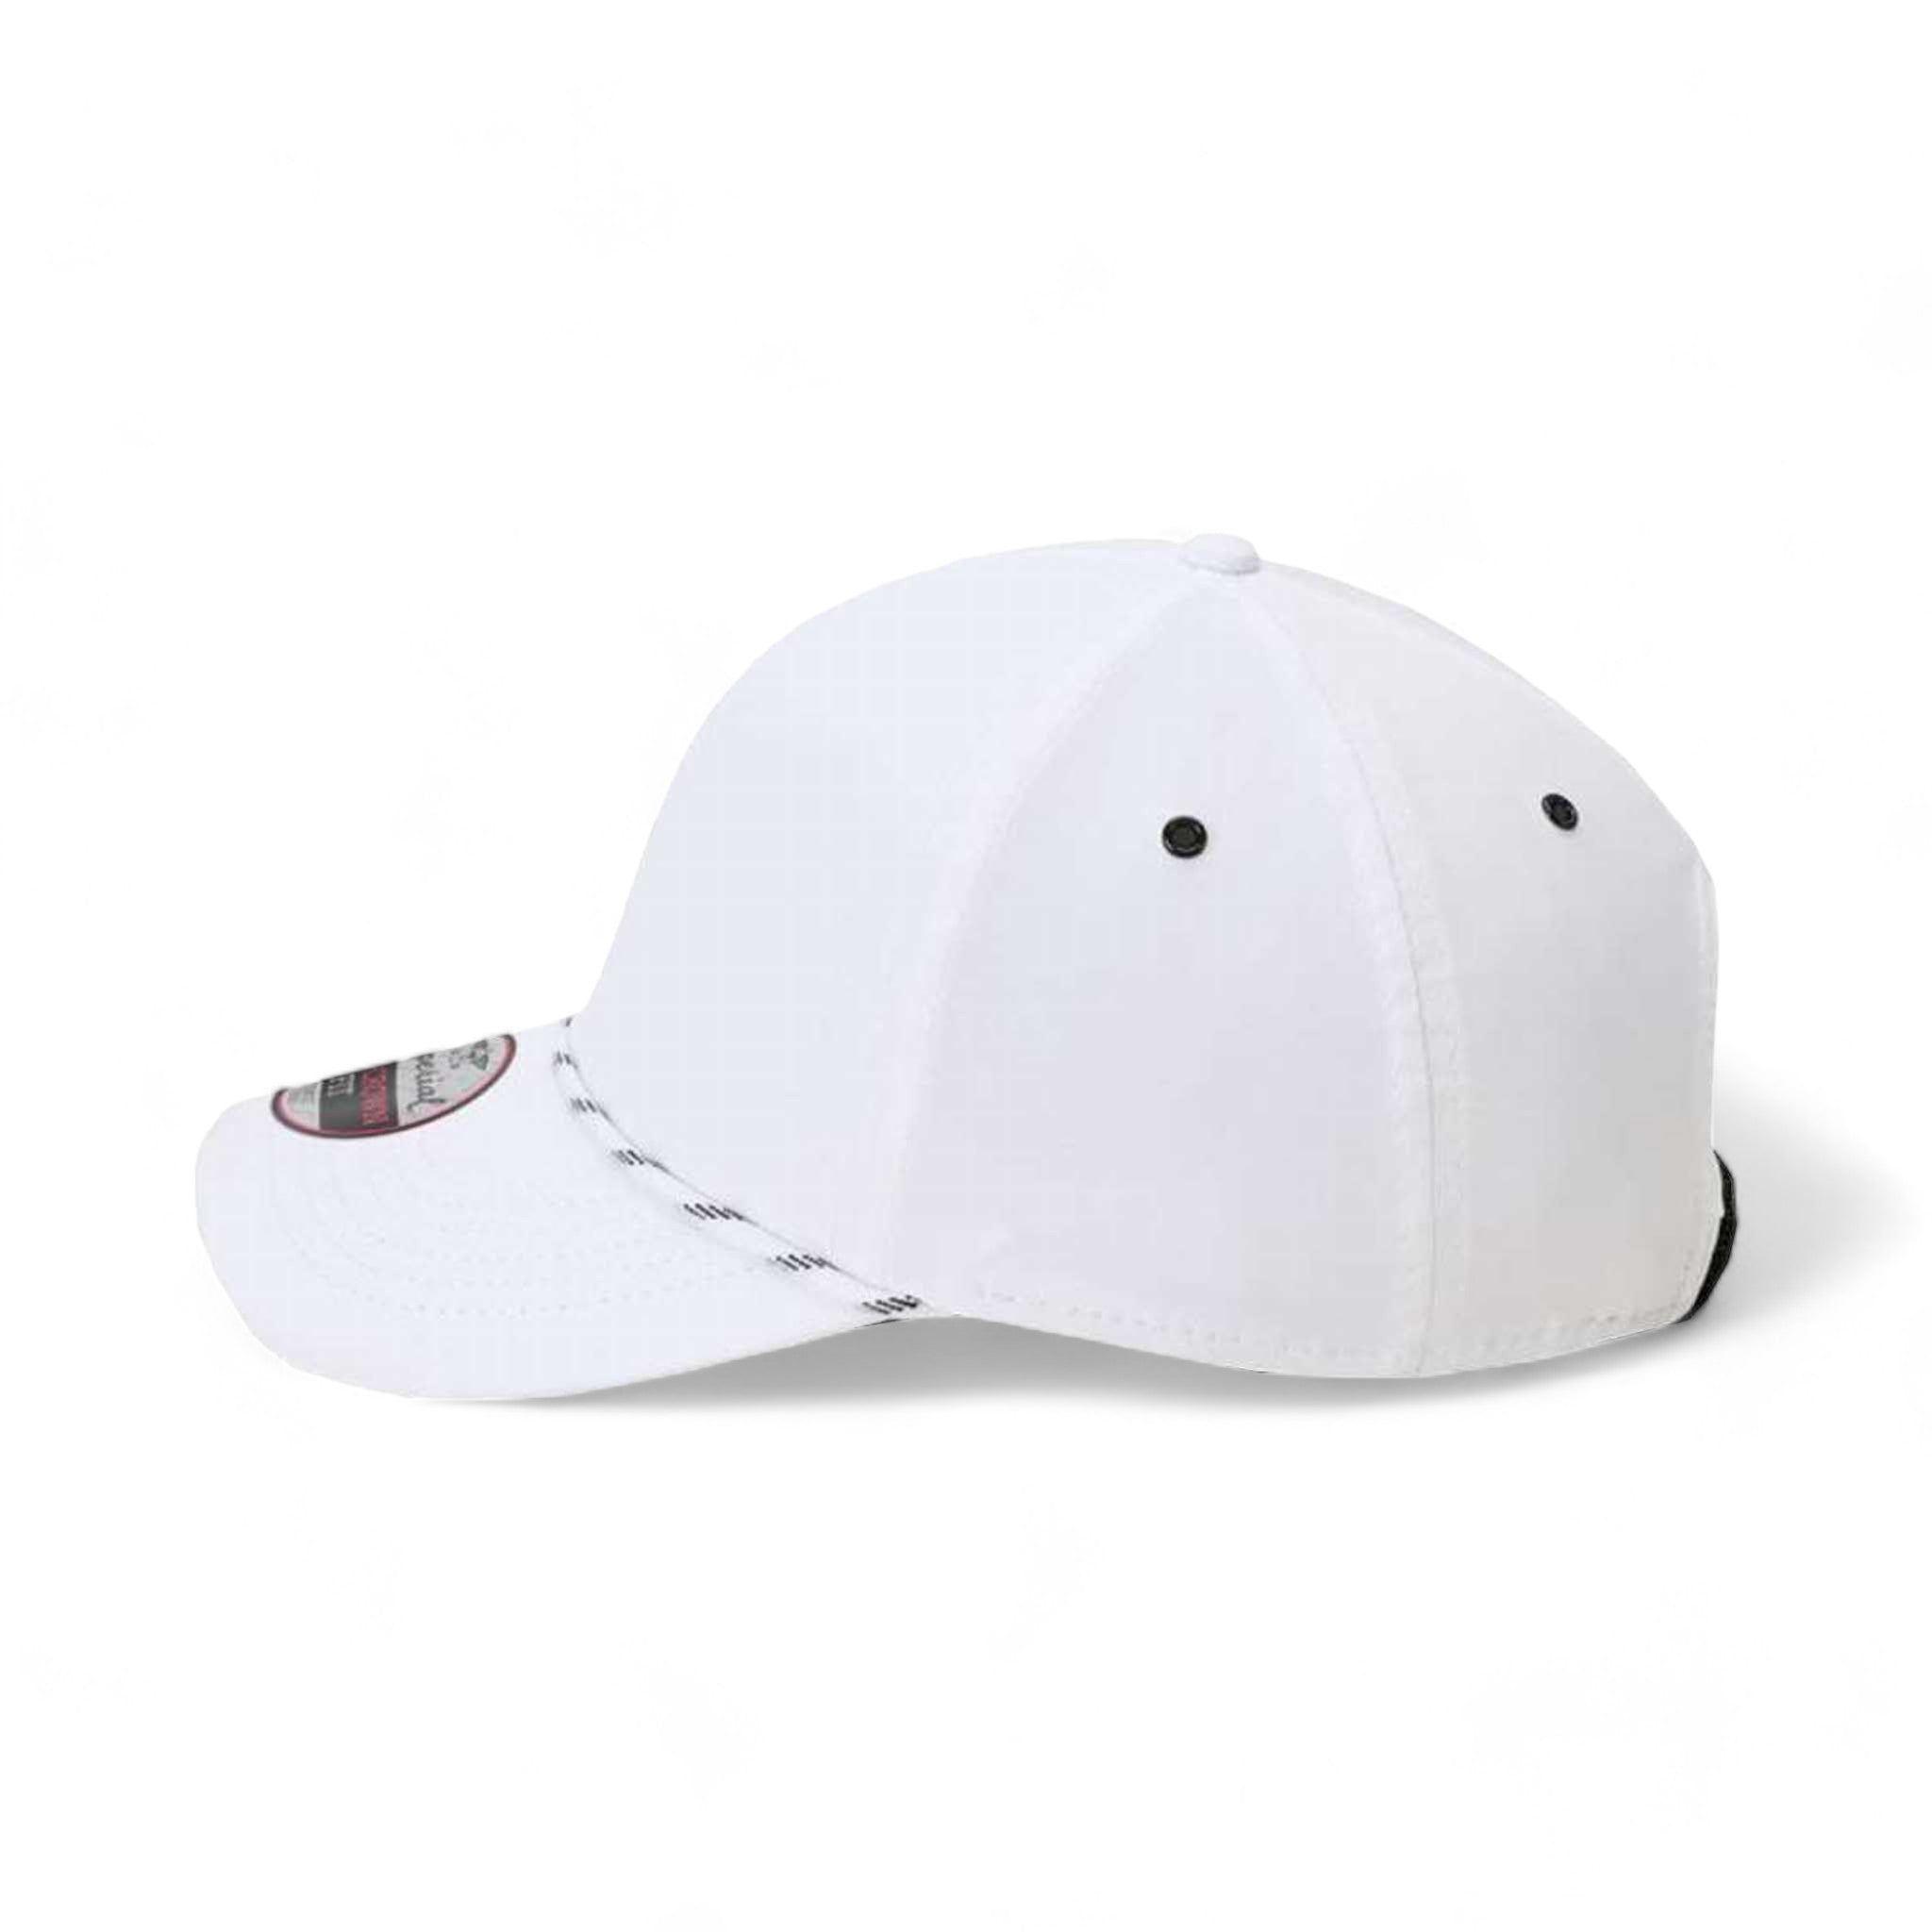 Side view of Imperial 6054 custom hat in white